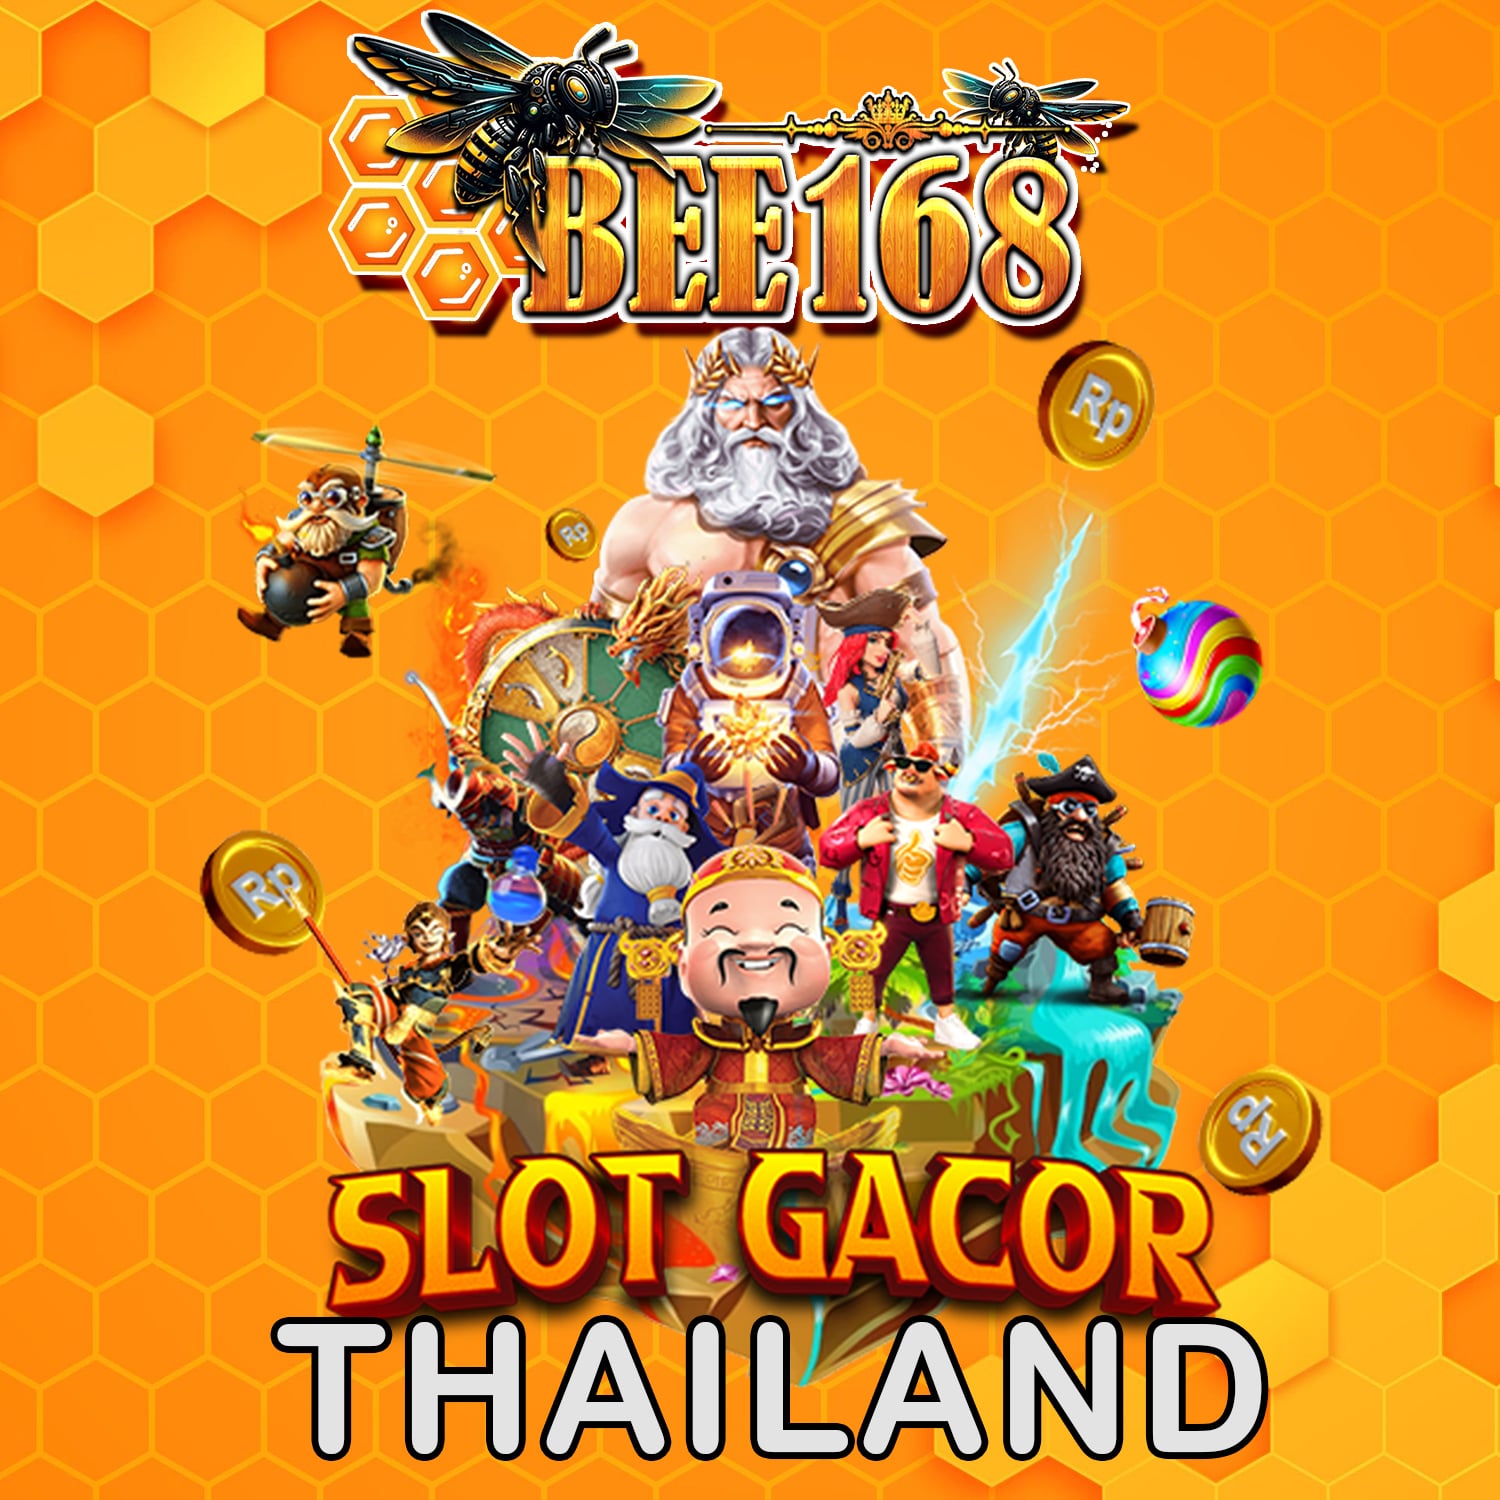 The Ultimate Guide to Top Online Slot Providers on BEE168: Easy Maxwin Servers in Thailand & Today’s Hottest Games